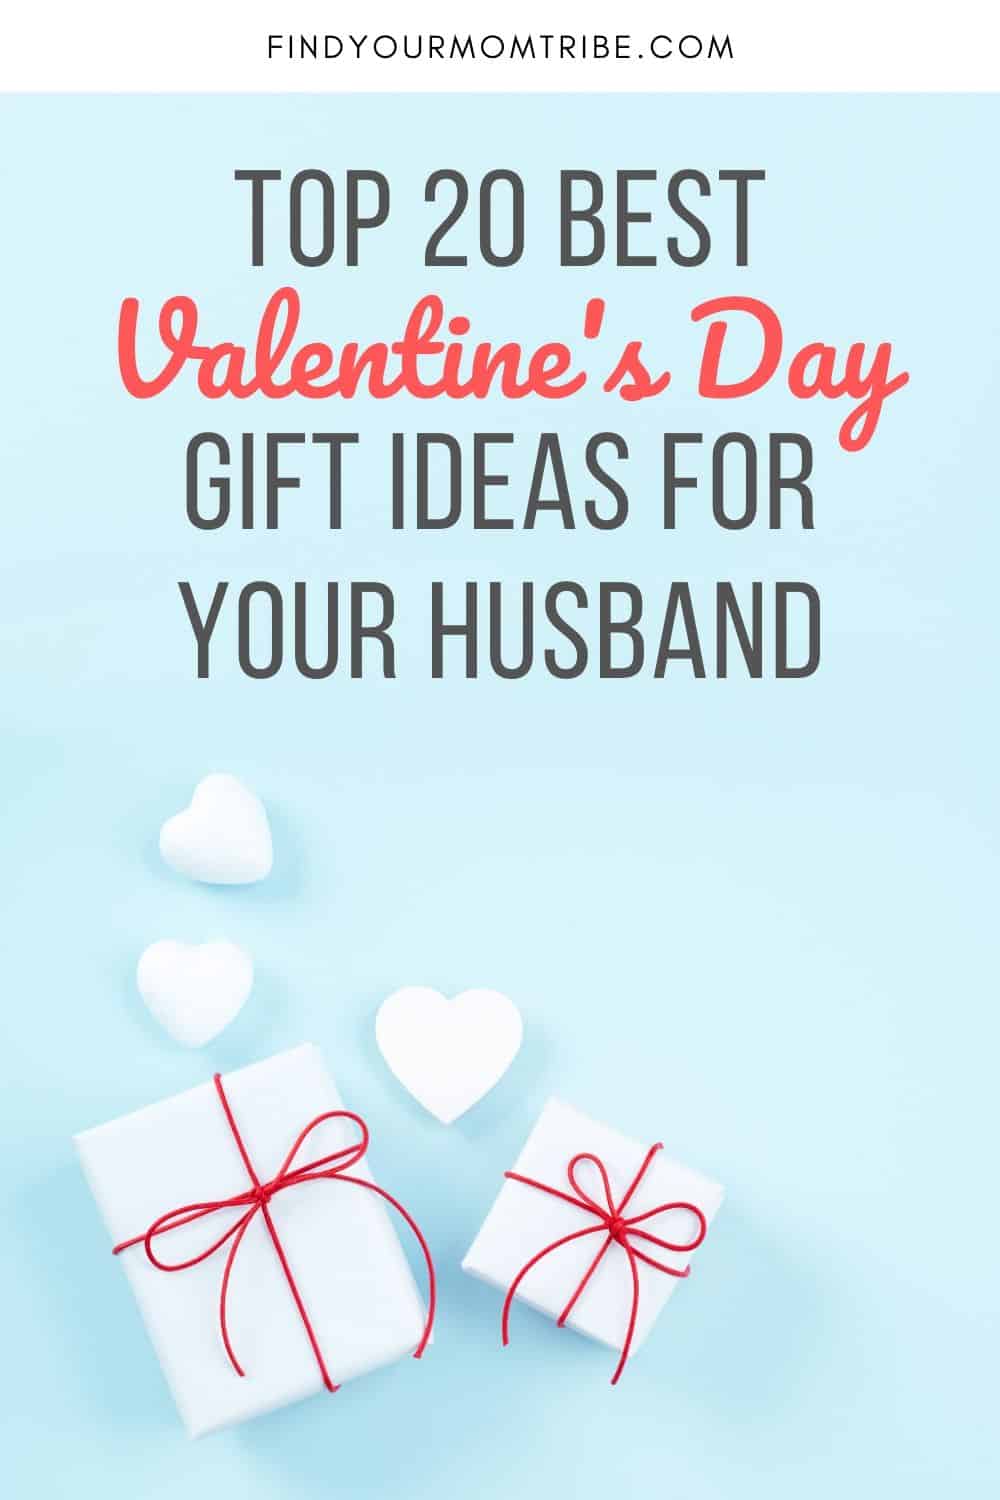 Pinterest Top 20 Best Valentine’s Day Gift Ideas For Your Husband